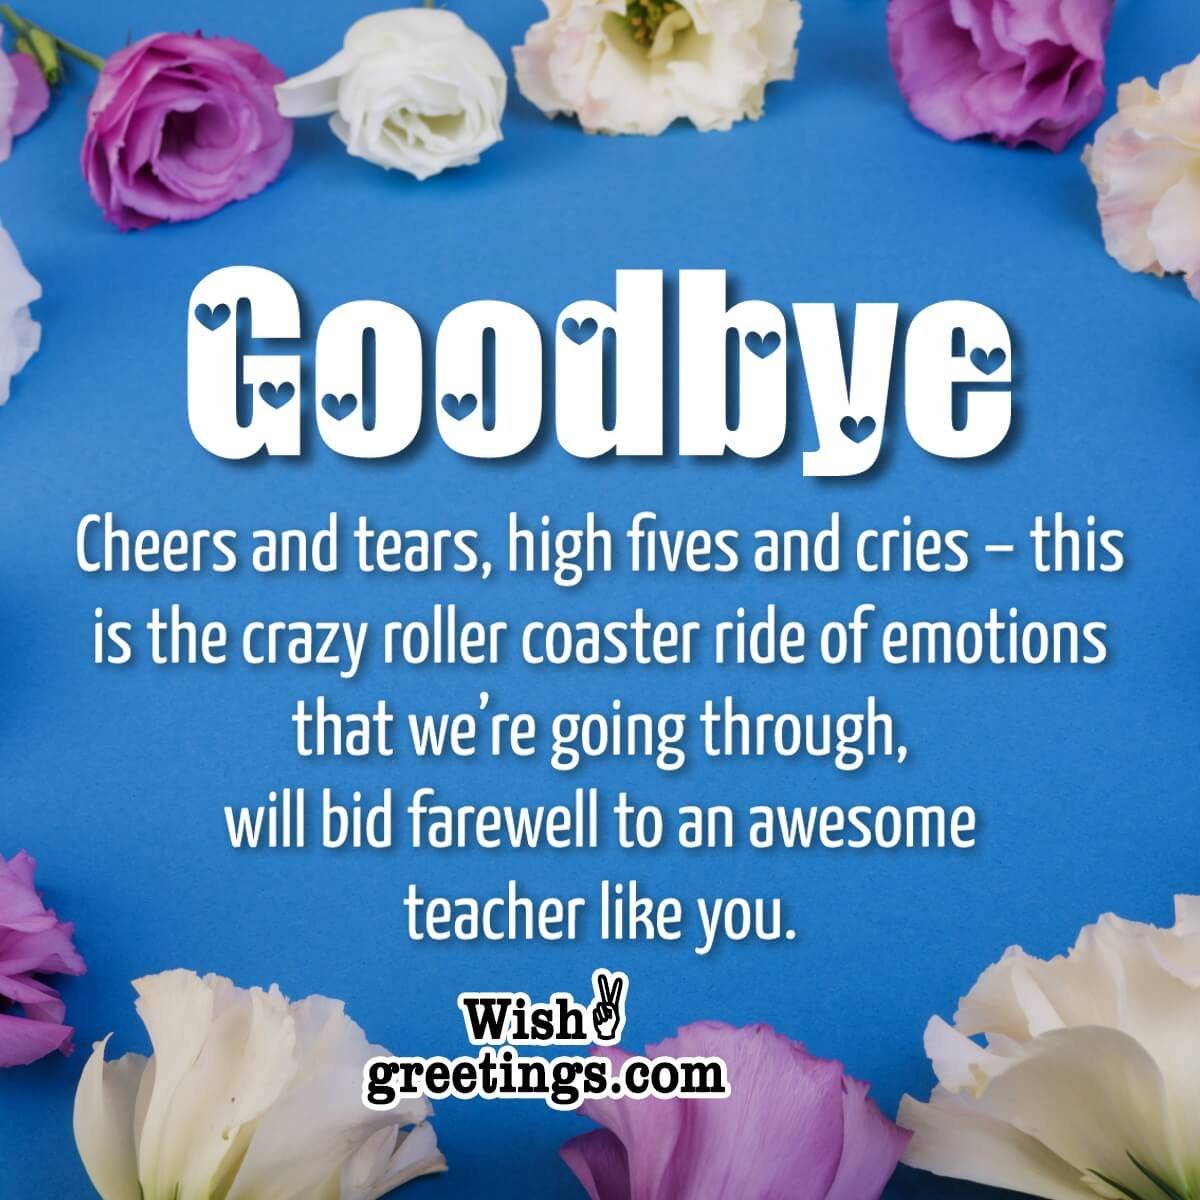 Emotional Farewell Messages for Teacher - Wish Greetings